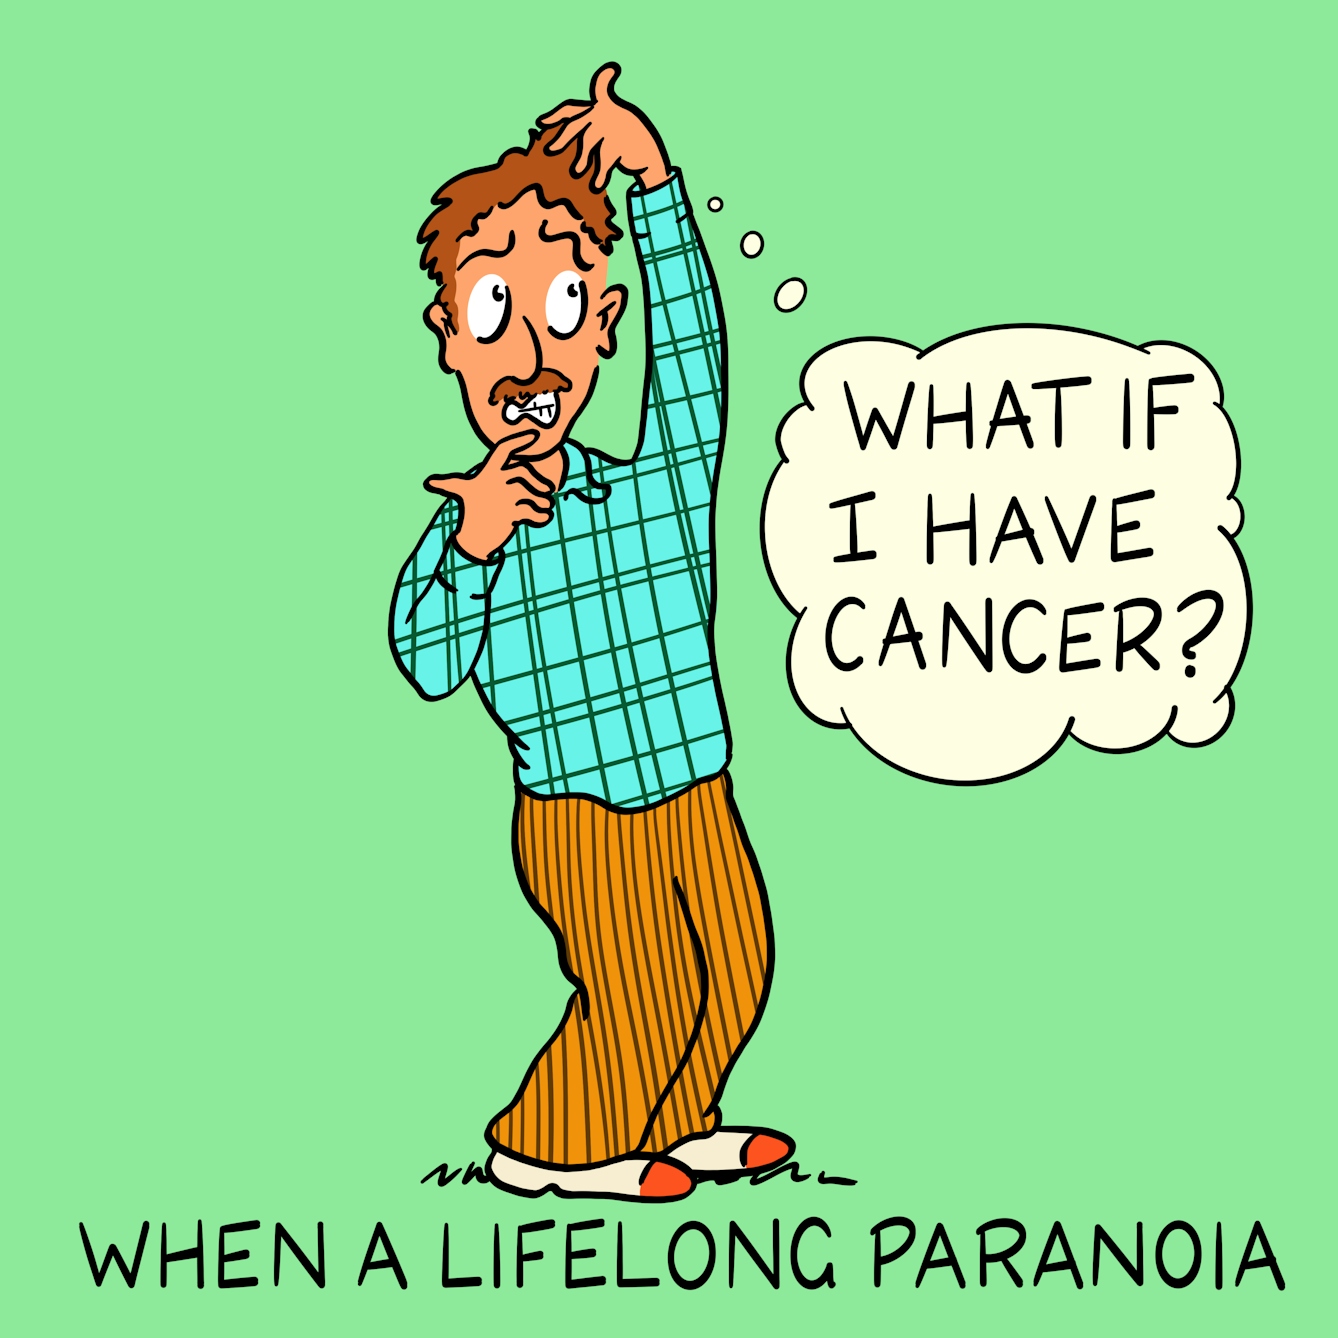 Panel 1 of a four-panel comic drawn digitally: a white man with a moustache, corduroy trousers and a plaid shirt anxiously scratches his head and bites his nails with a thought bubble asking "What if I have cancer?". The caption text reads "When a lifelong paranoia..."